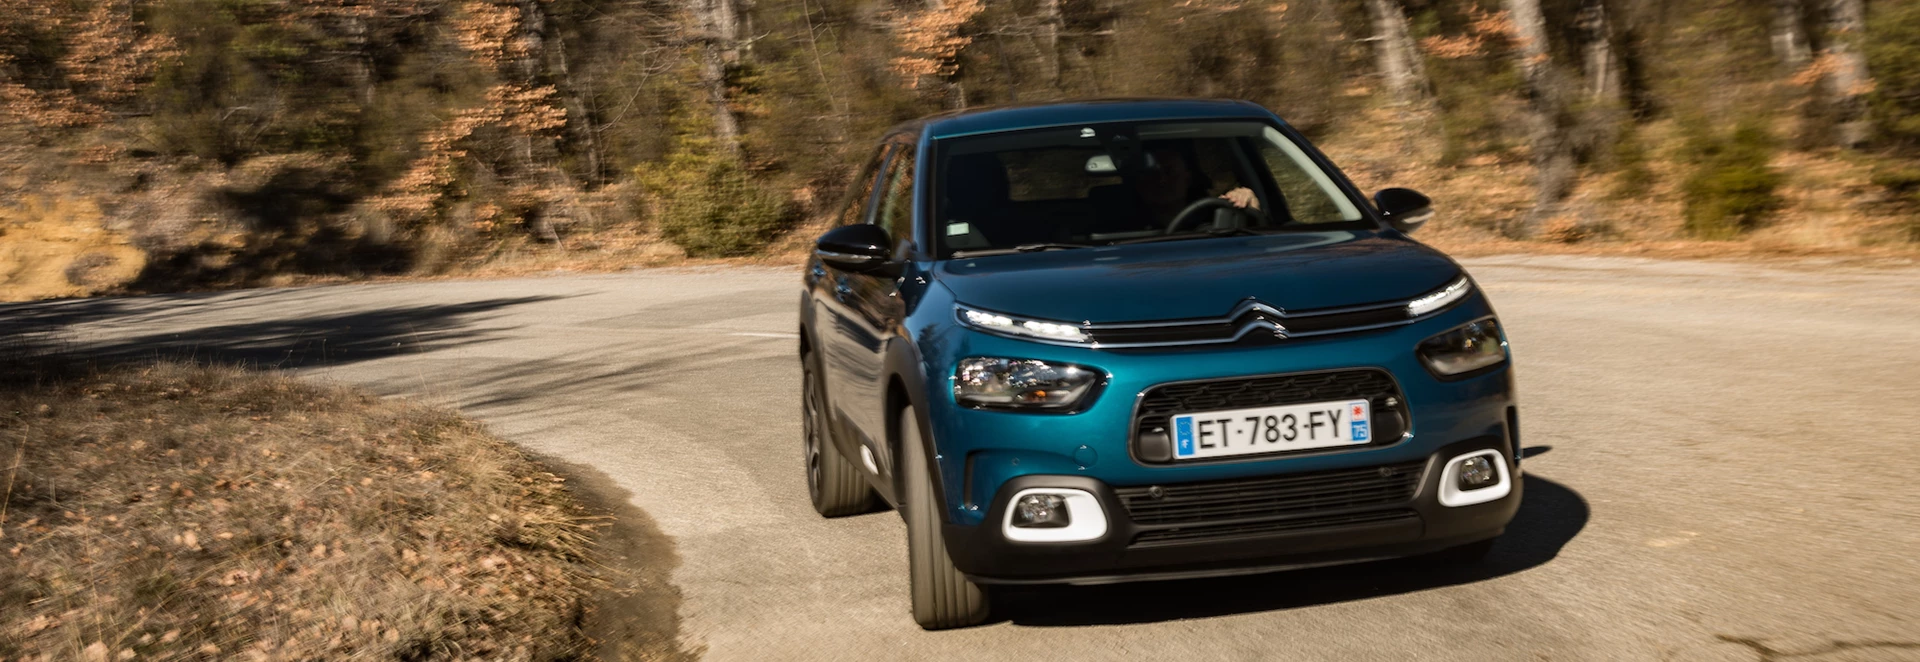 What's new with the 2018 Citroen C4 Cactus